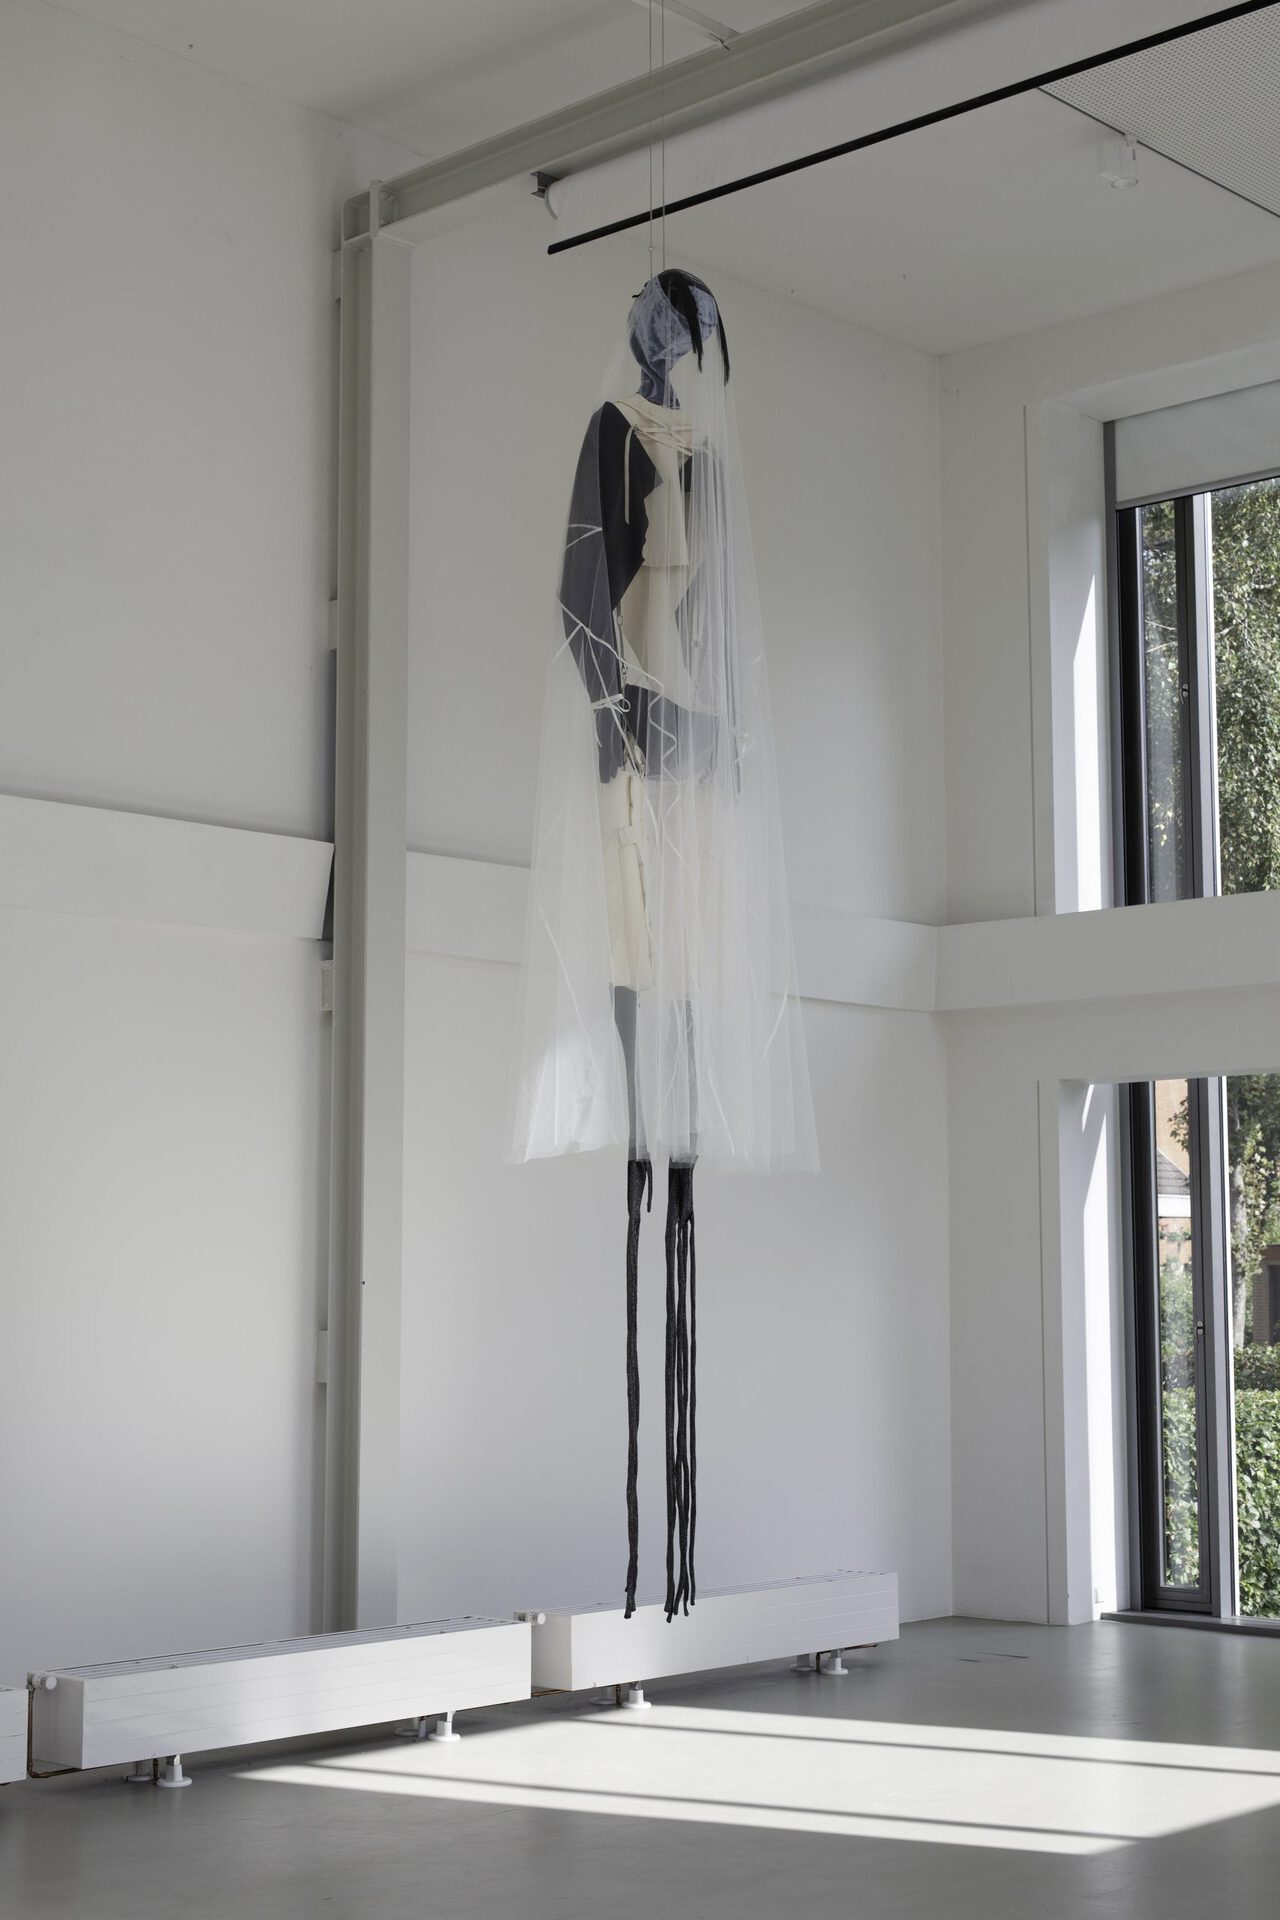 Bruno Zhu, You know what you are, 2010-2021, fabric, fabric, synthetic hair eyelashes, hardware, various dimension. Photo: Jens Franke.